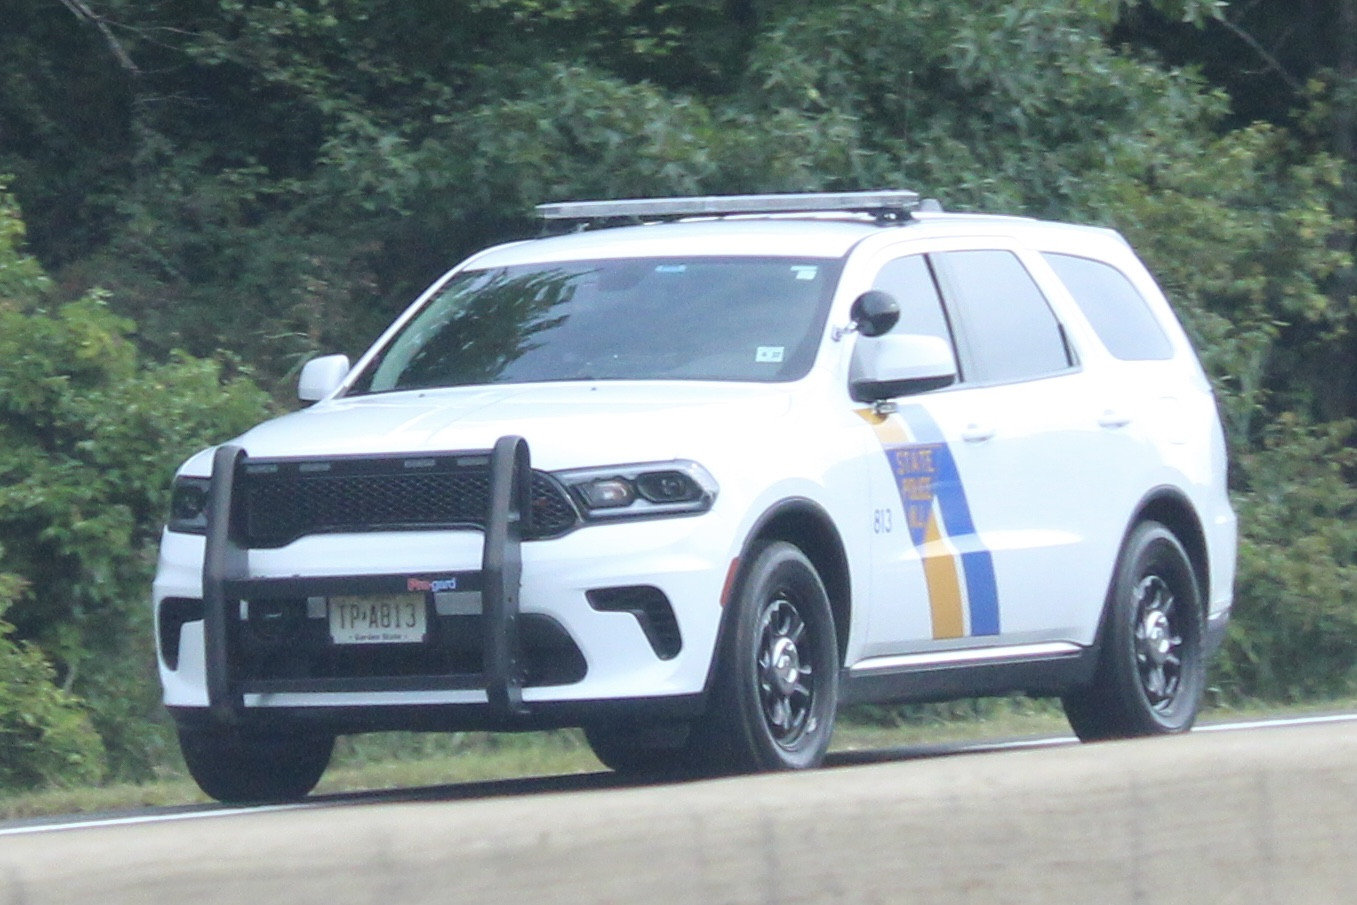 A photo  of New Jersey State Police
            Cruiser 813, a 2021 Dodge Durango             taken by @riemergencyvehicles